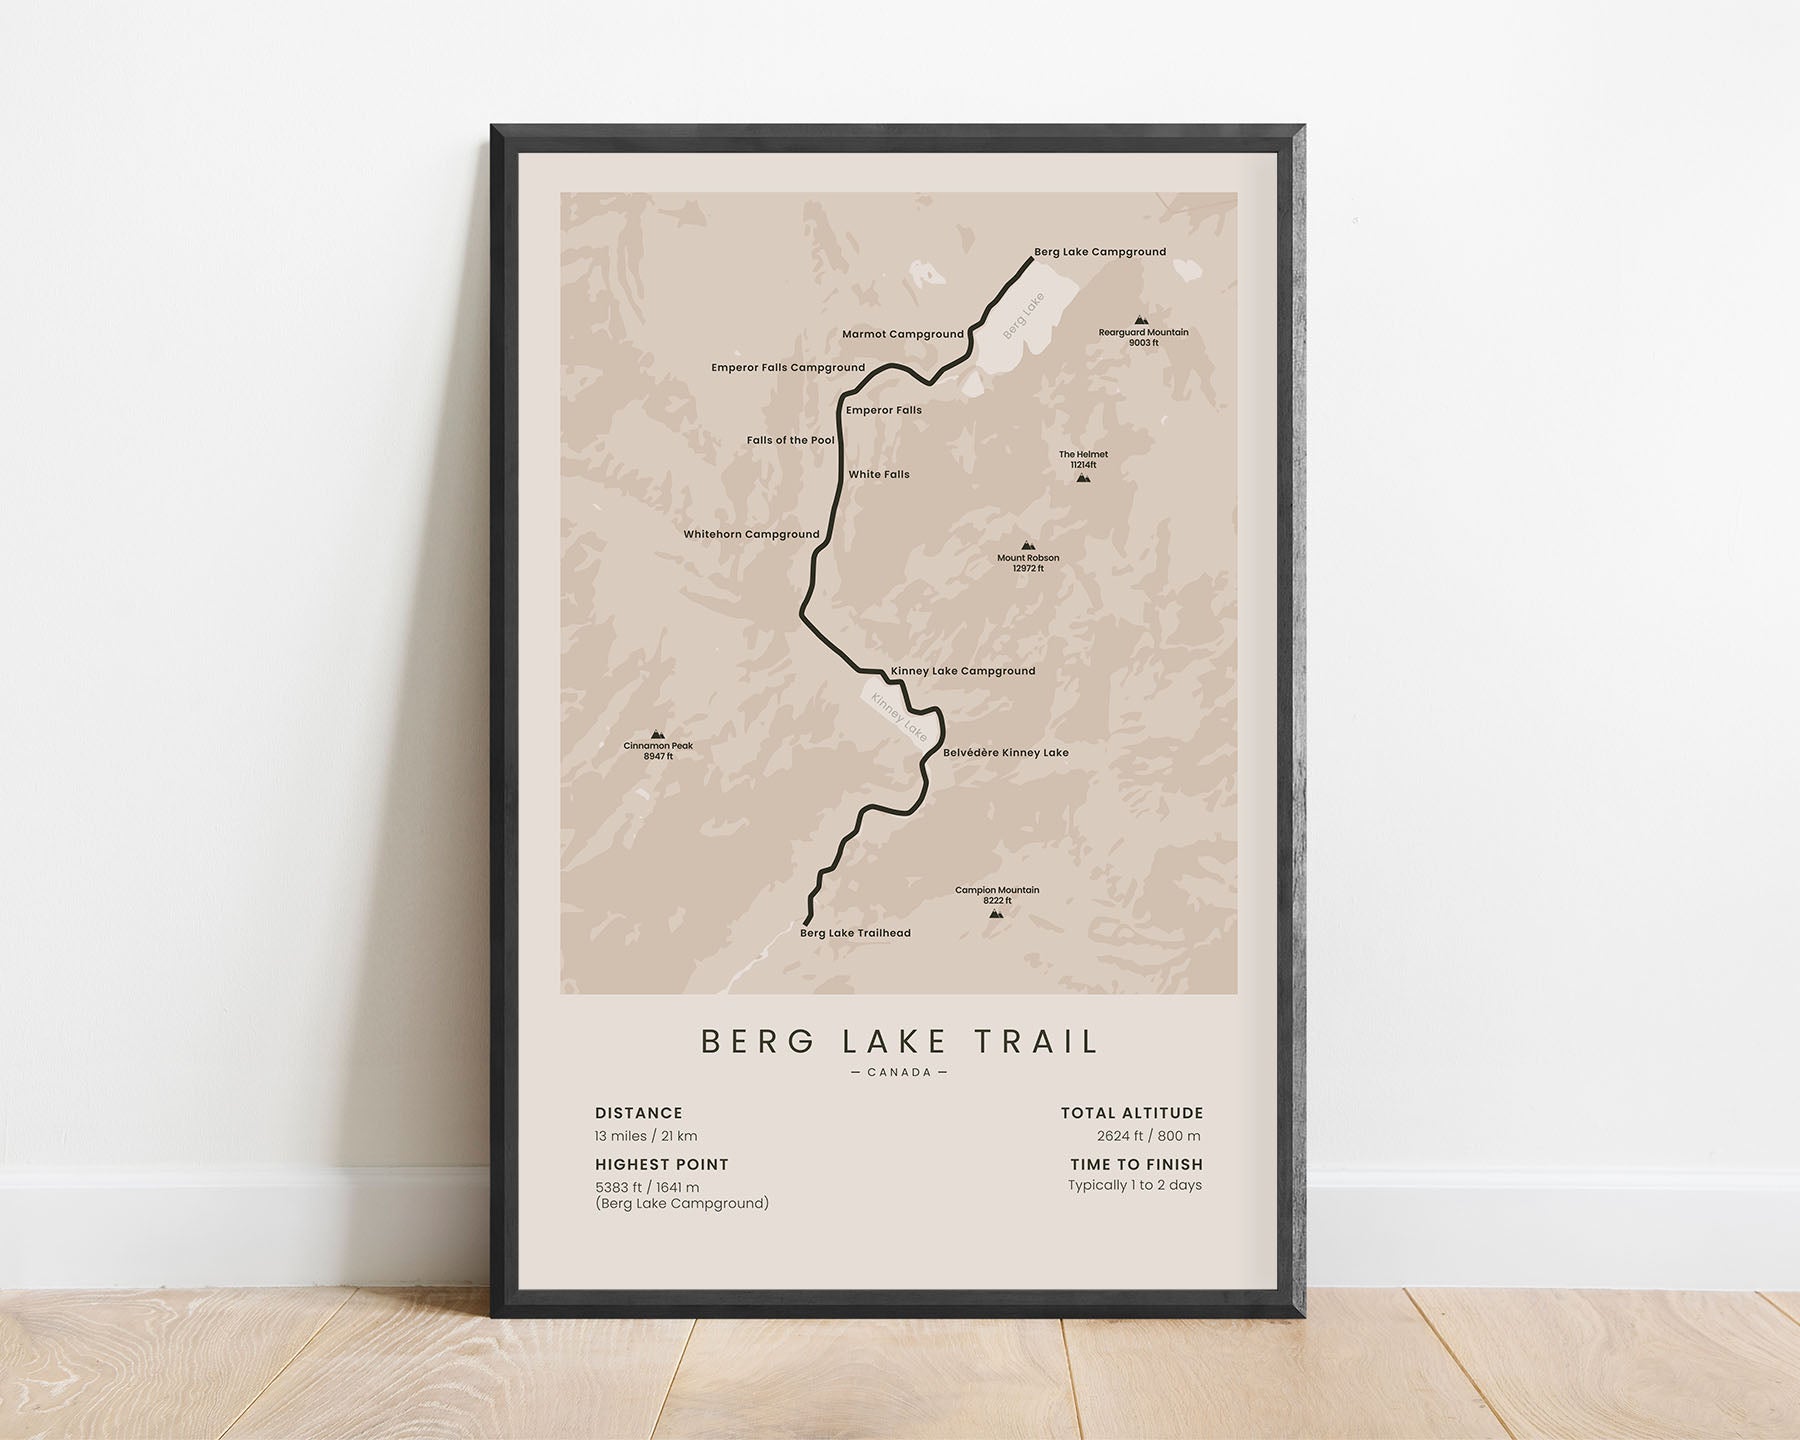 Berg Lake Trail (Canadian Rockies) hike wall map with beige background